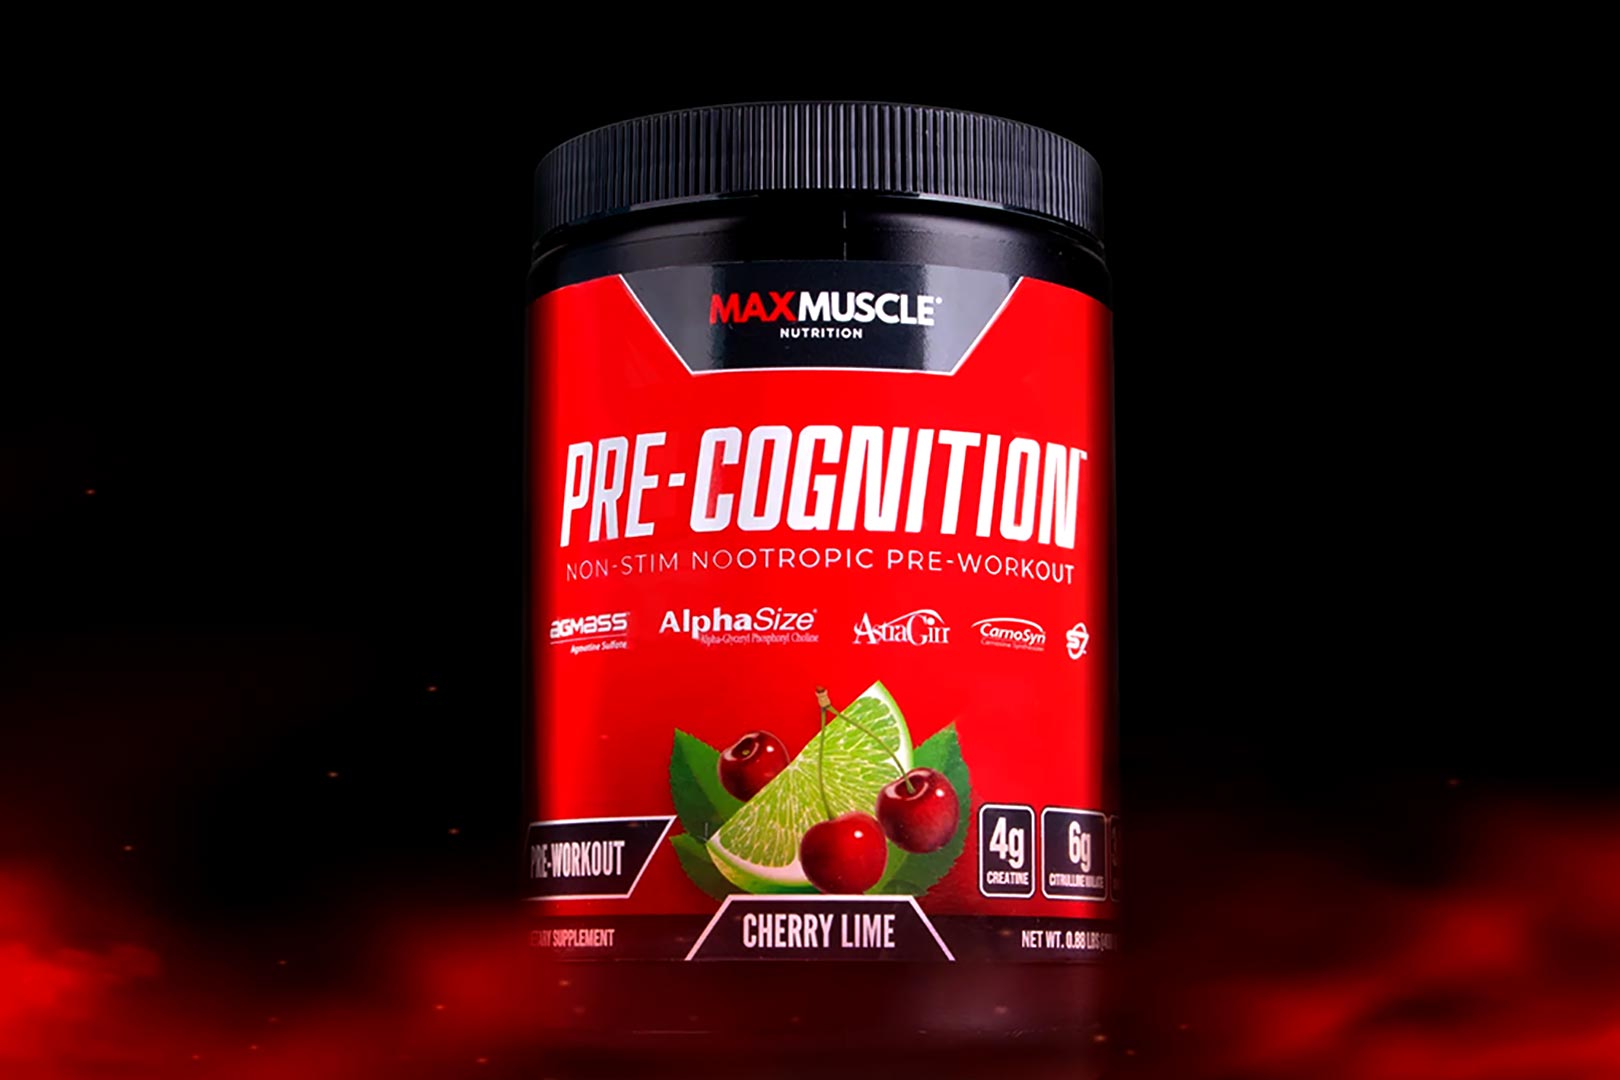 Max Muscle Pre Cognition